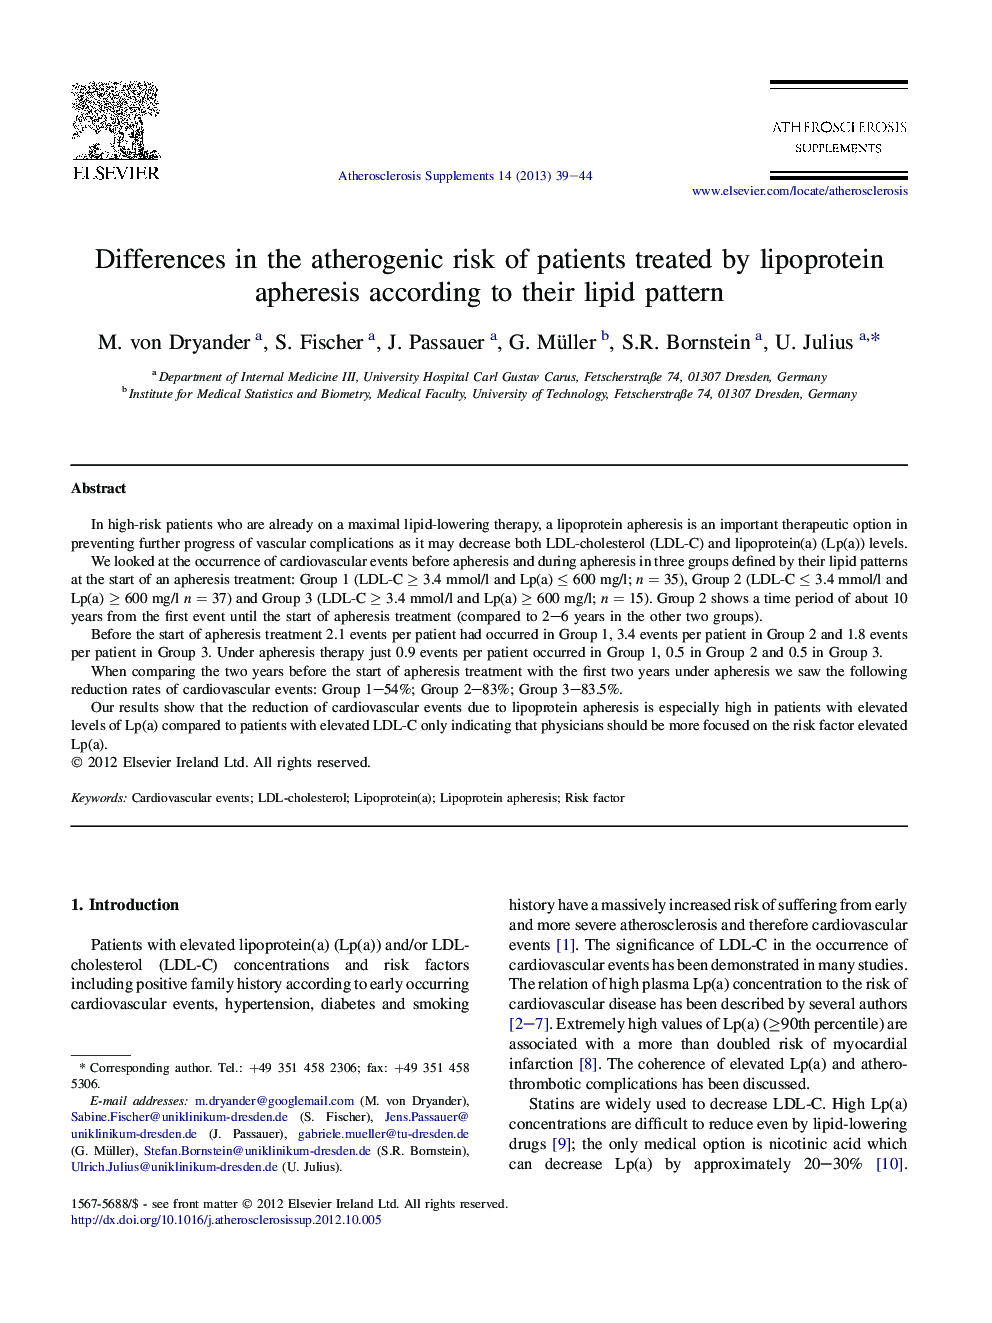 Differences in the atherogenic risk of patients treated by lipoprotein apheresis according to their lipid pattern